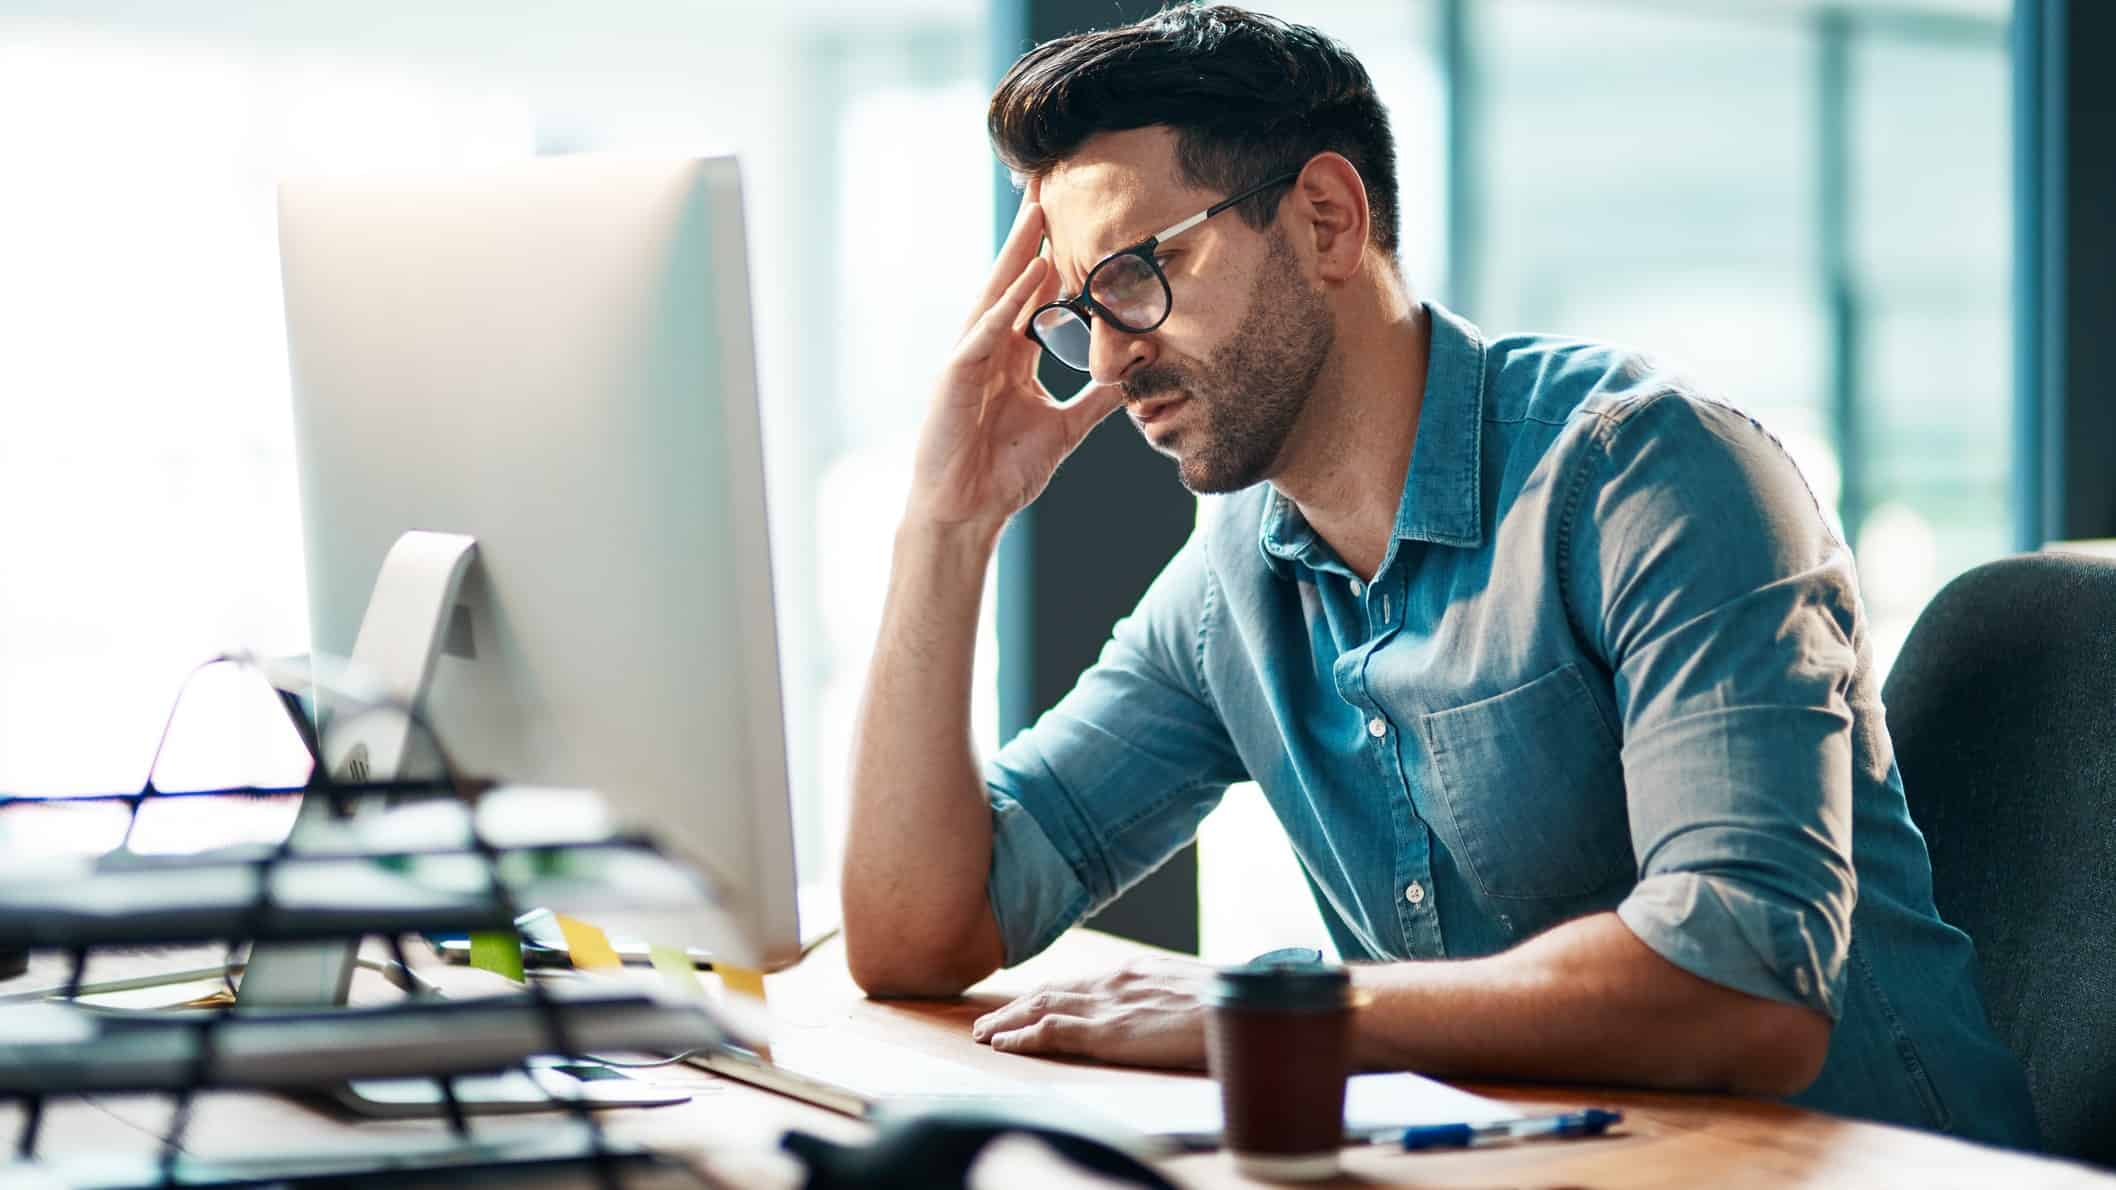 A male executive worker wearing glasses and a blue collared shirt looks at his laptop screen with a concerned look on his face and his hand to his forehead as he watches the Bank of Queensland share price fall